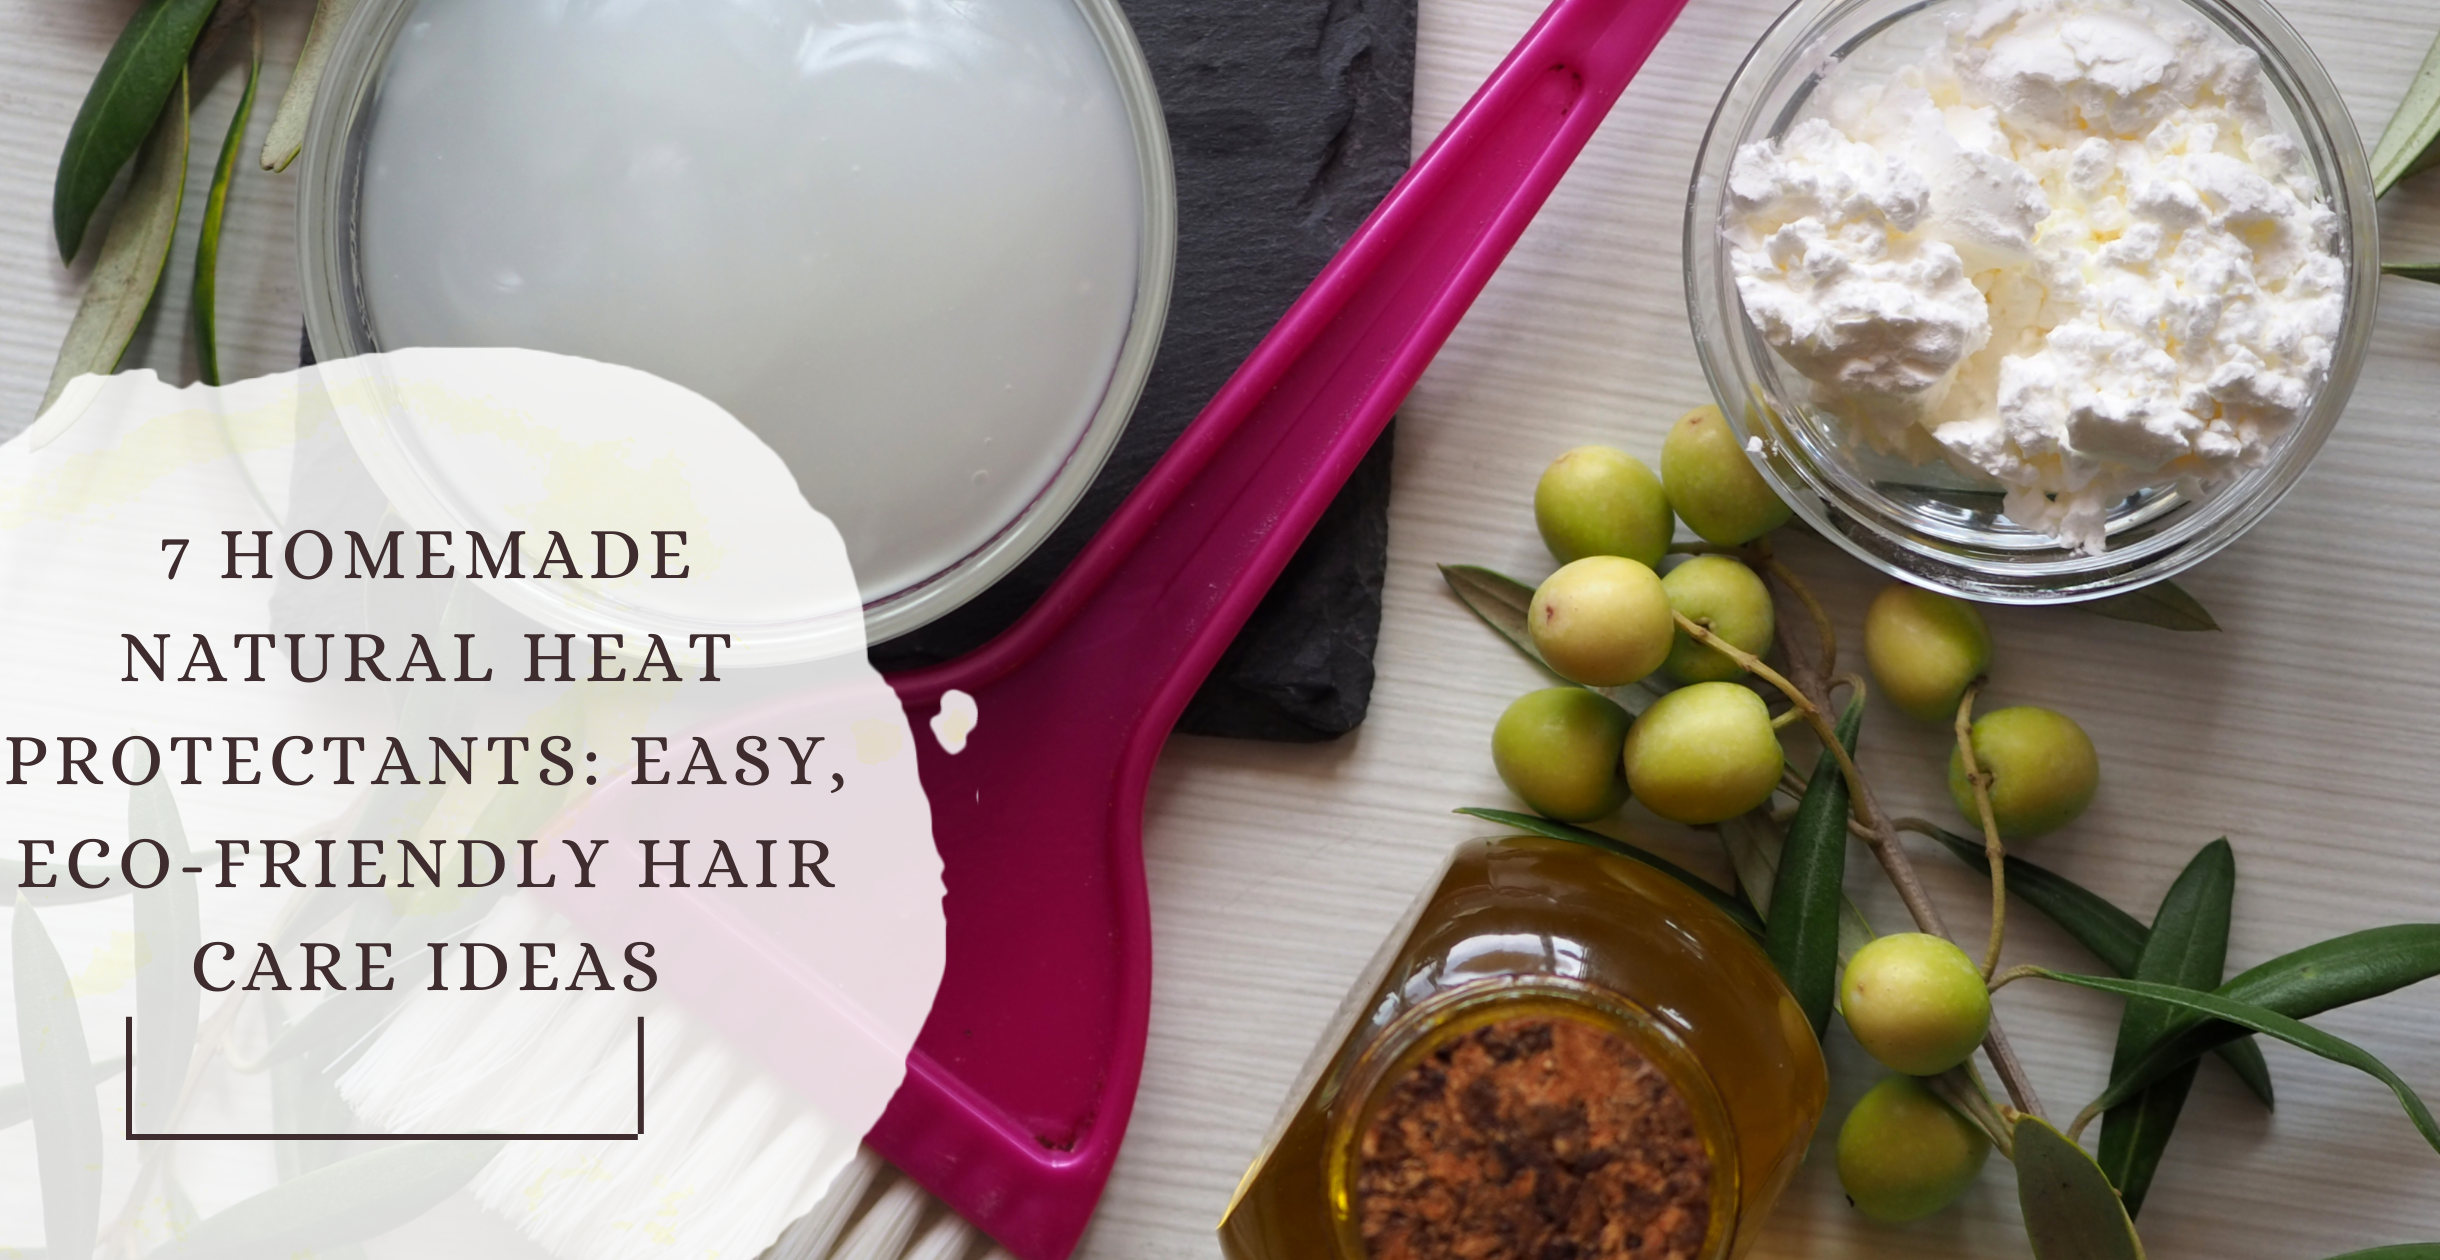 7 Homemade Natural Heat Protectants: Easy, Eco-Friendly Hair Care Ideas